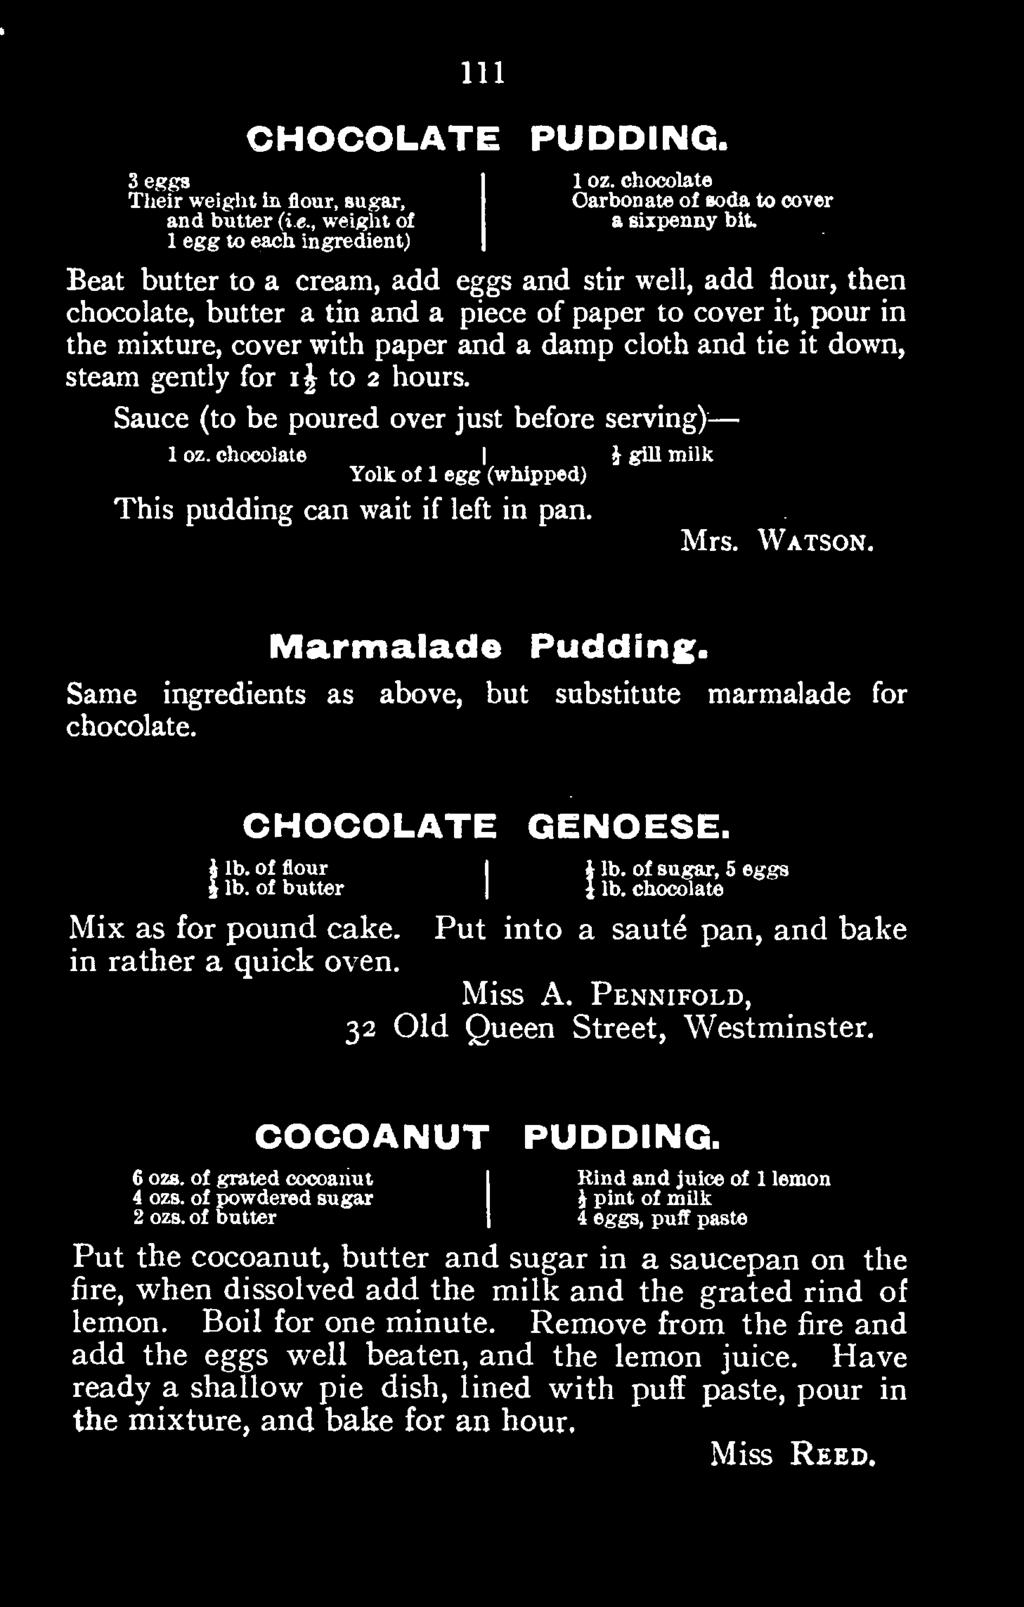 Put into a saute pan, and bake in rather a quick oven. Miss A. Pennifold, 32 Old Queen Street, Westminster. COCOANUT PUDDING.